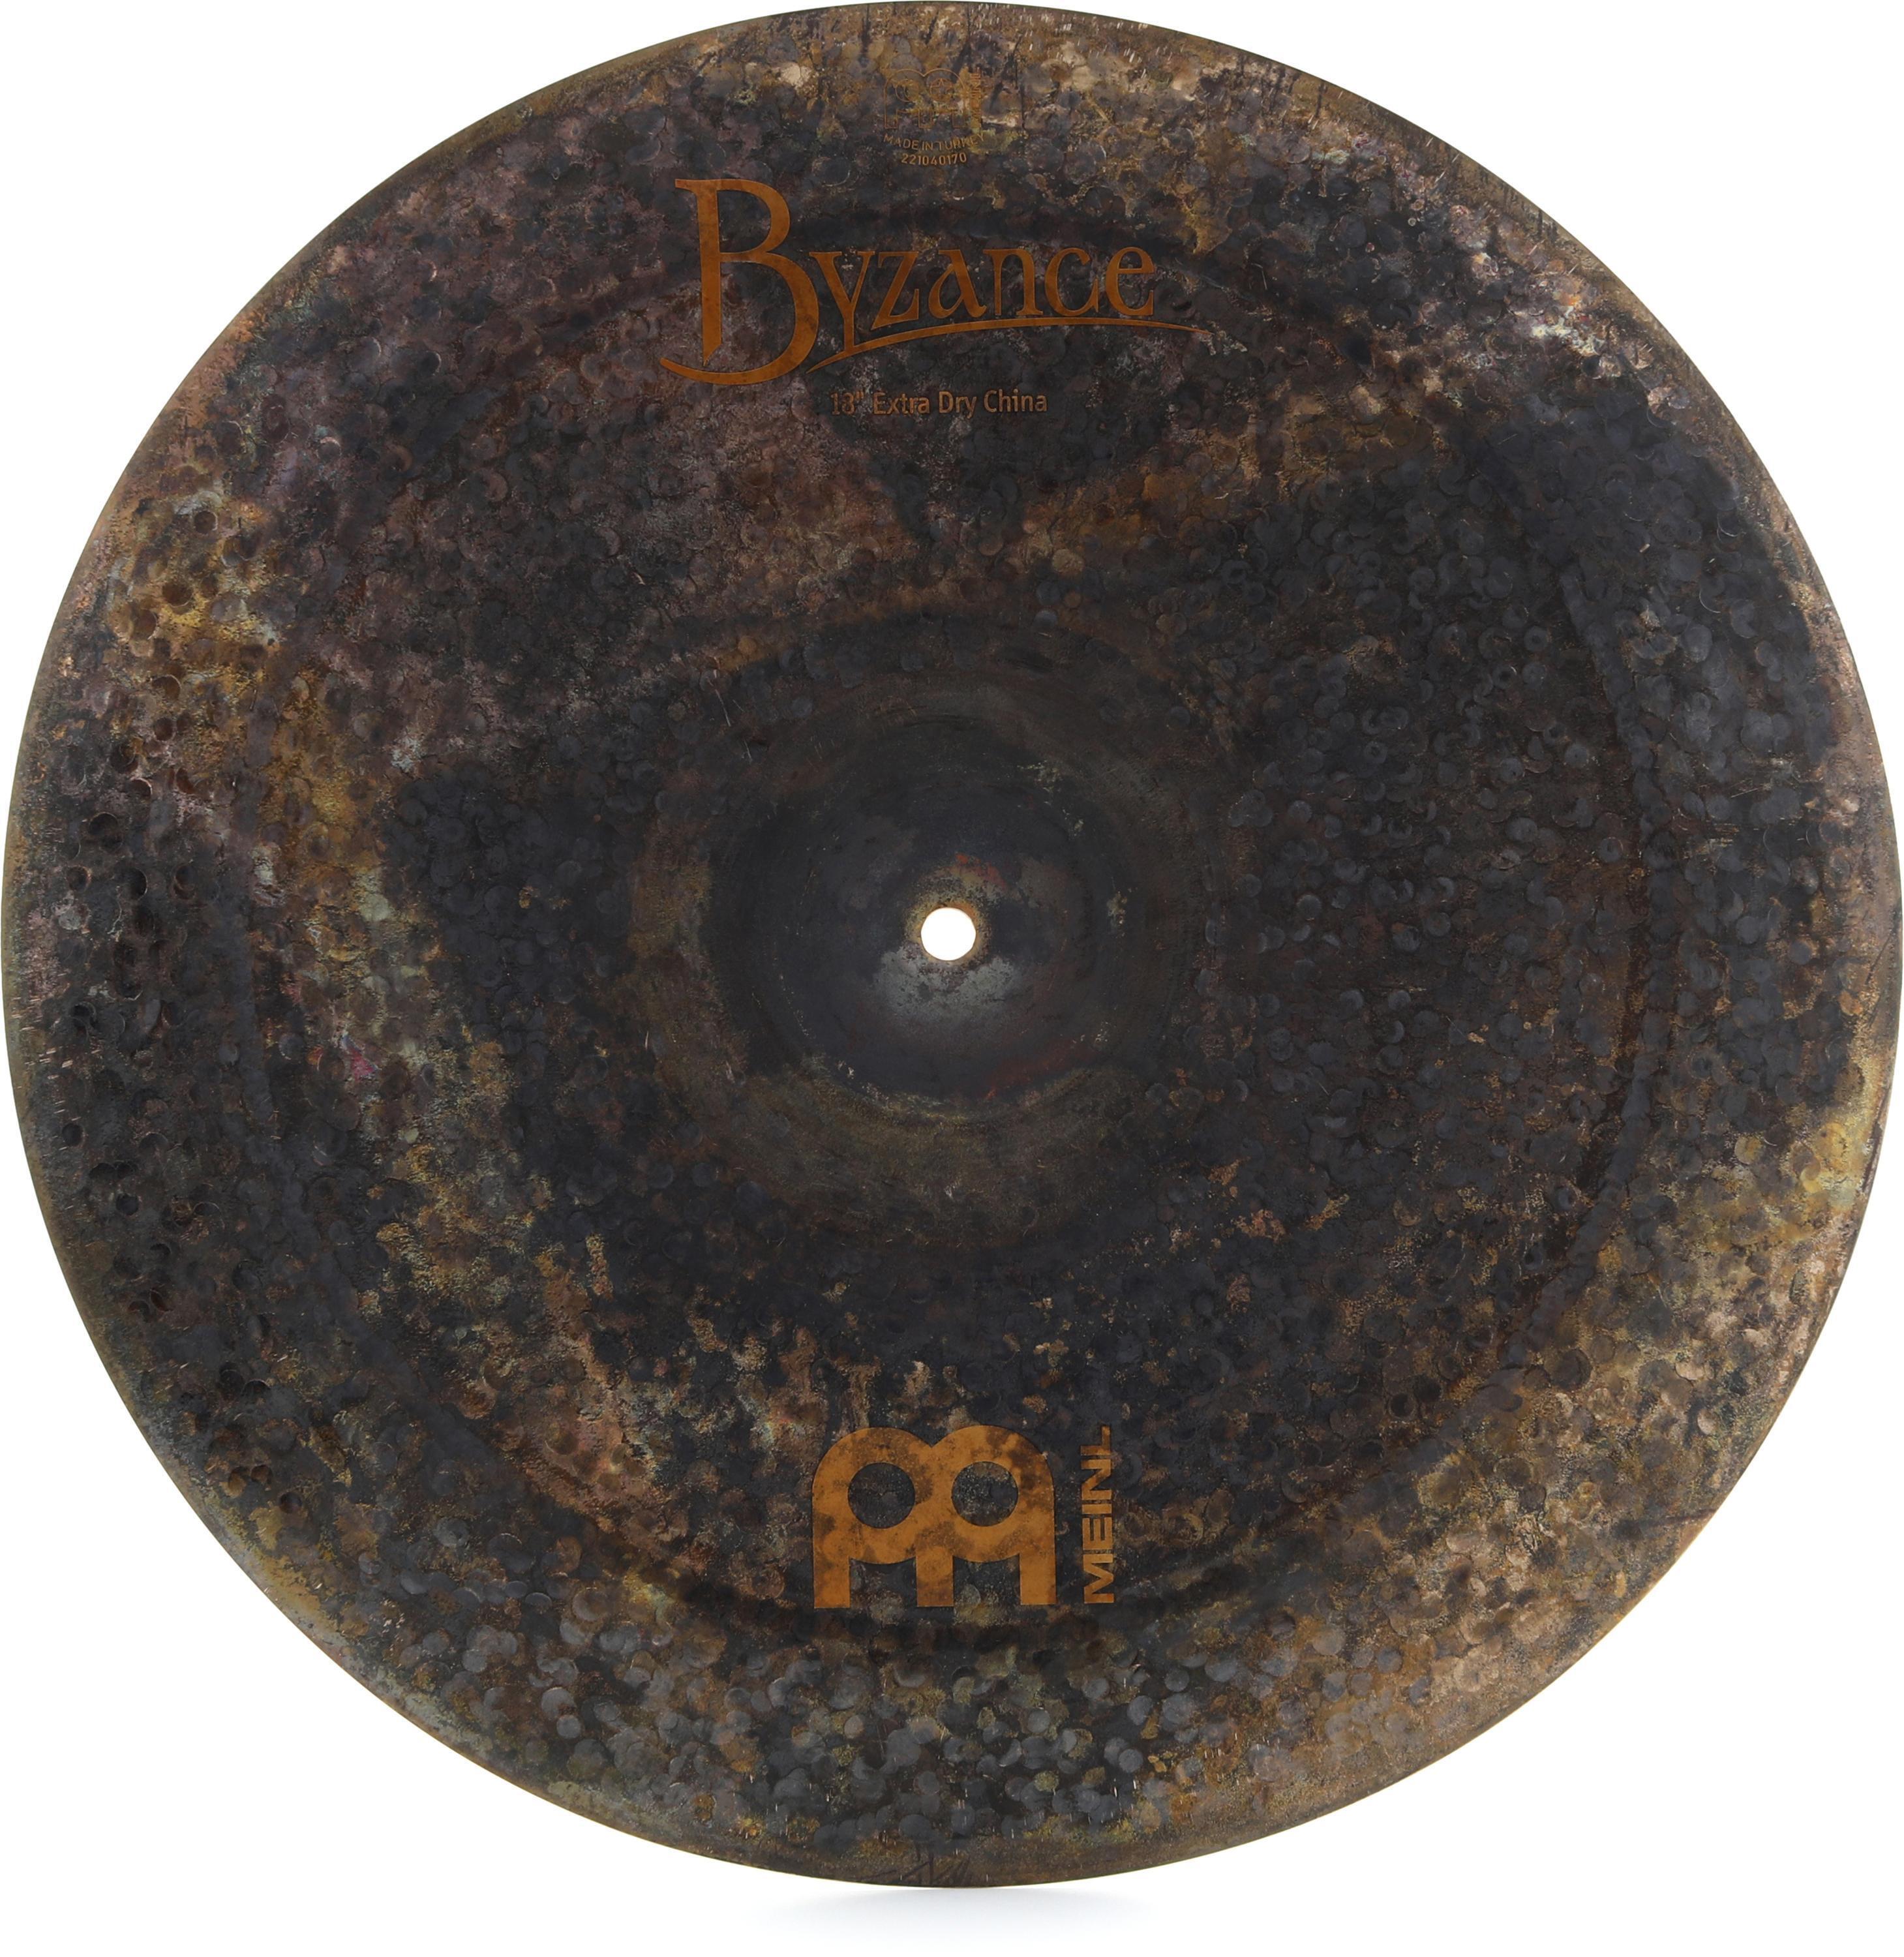 Meinl Cymbals 18-inch Byzance Extra Dry China Cymbal | Sweetwater